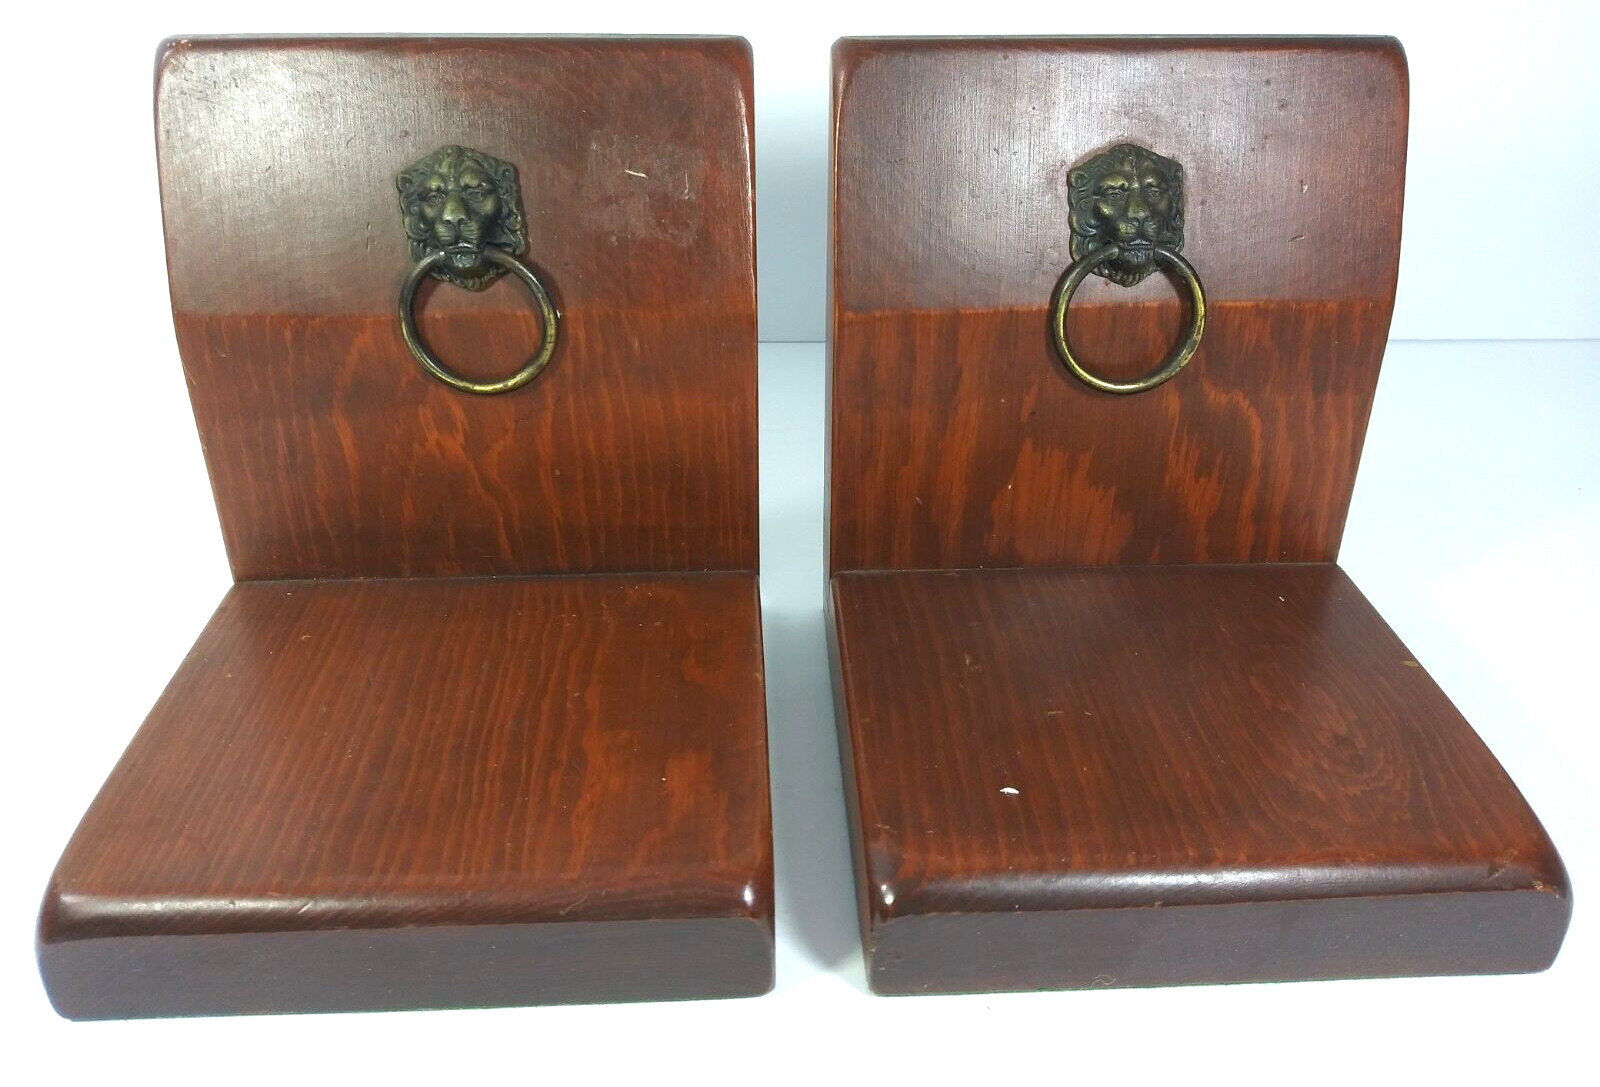 Vintage Wooden Bookends With Brass Lion Head Ring Accents